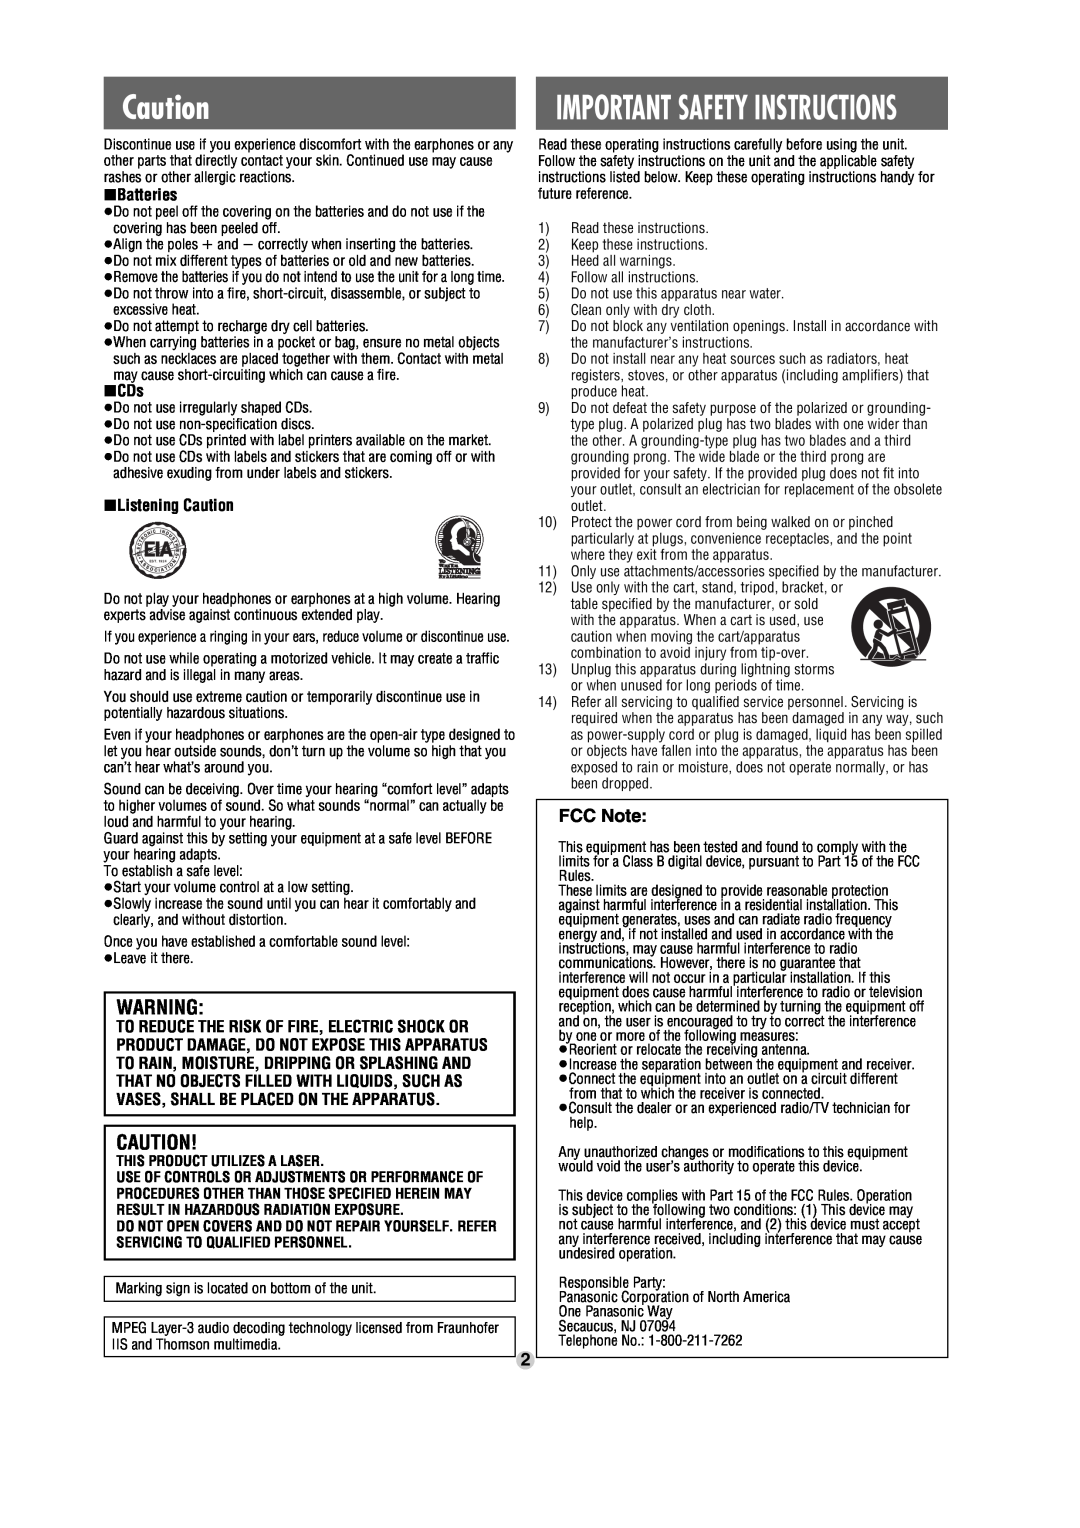 Panasonic SL-SX470 operating instructions FCC Note, Important Safety Instructions, This Product Utilizes A Laser 